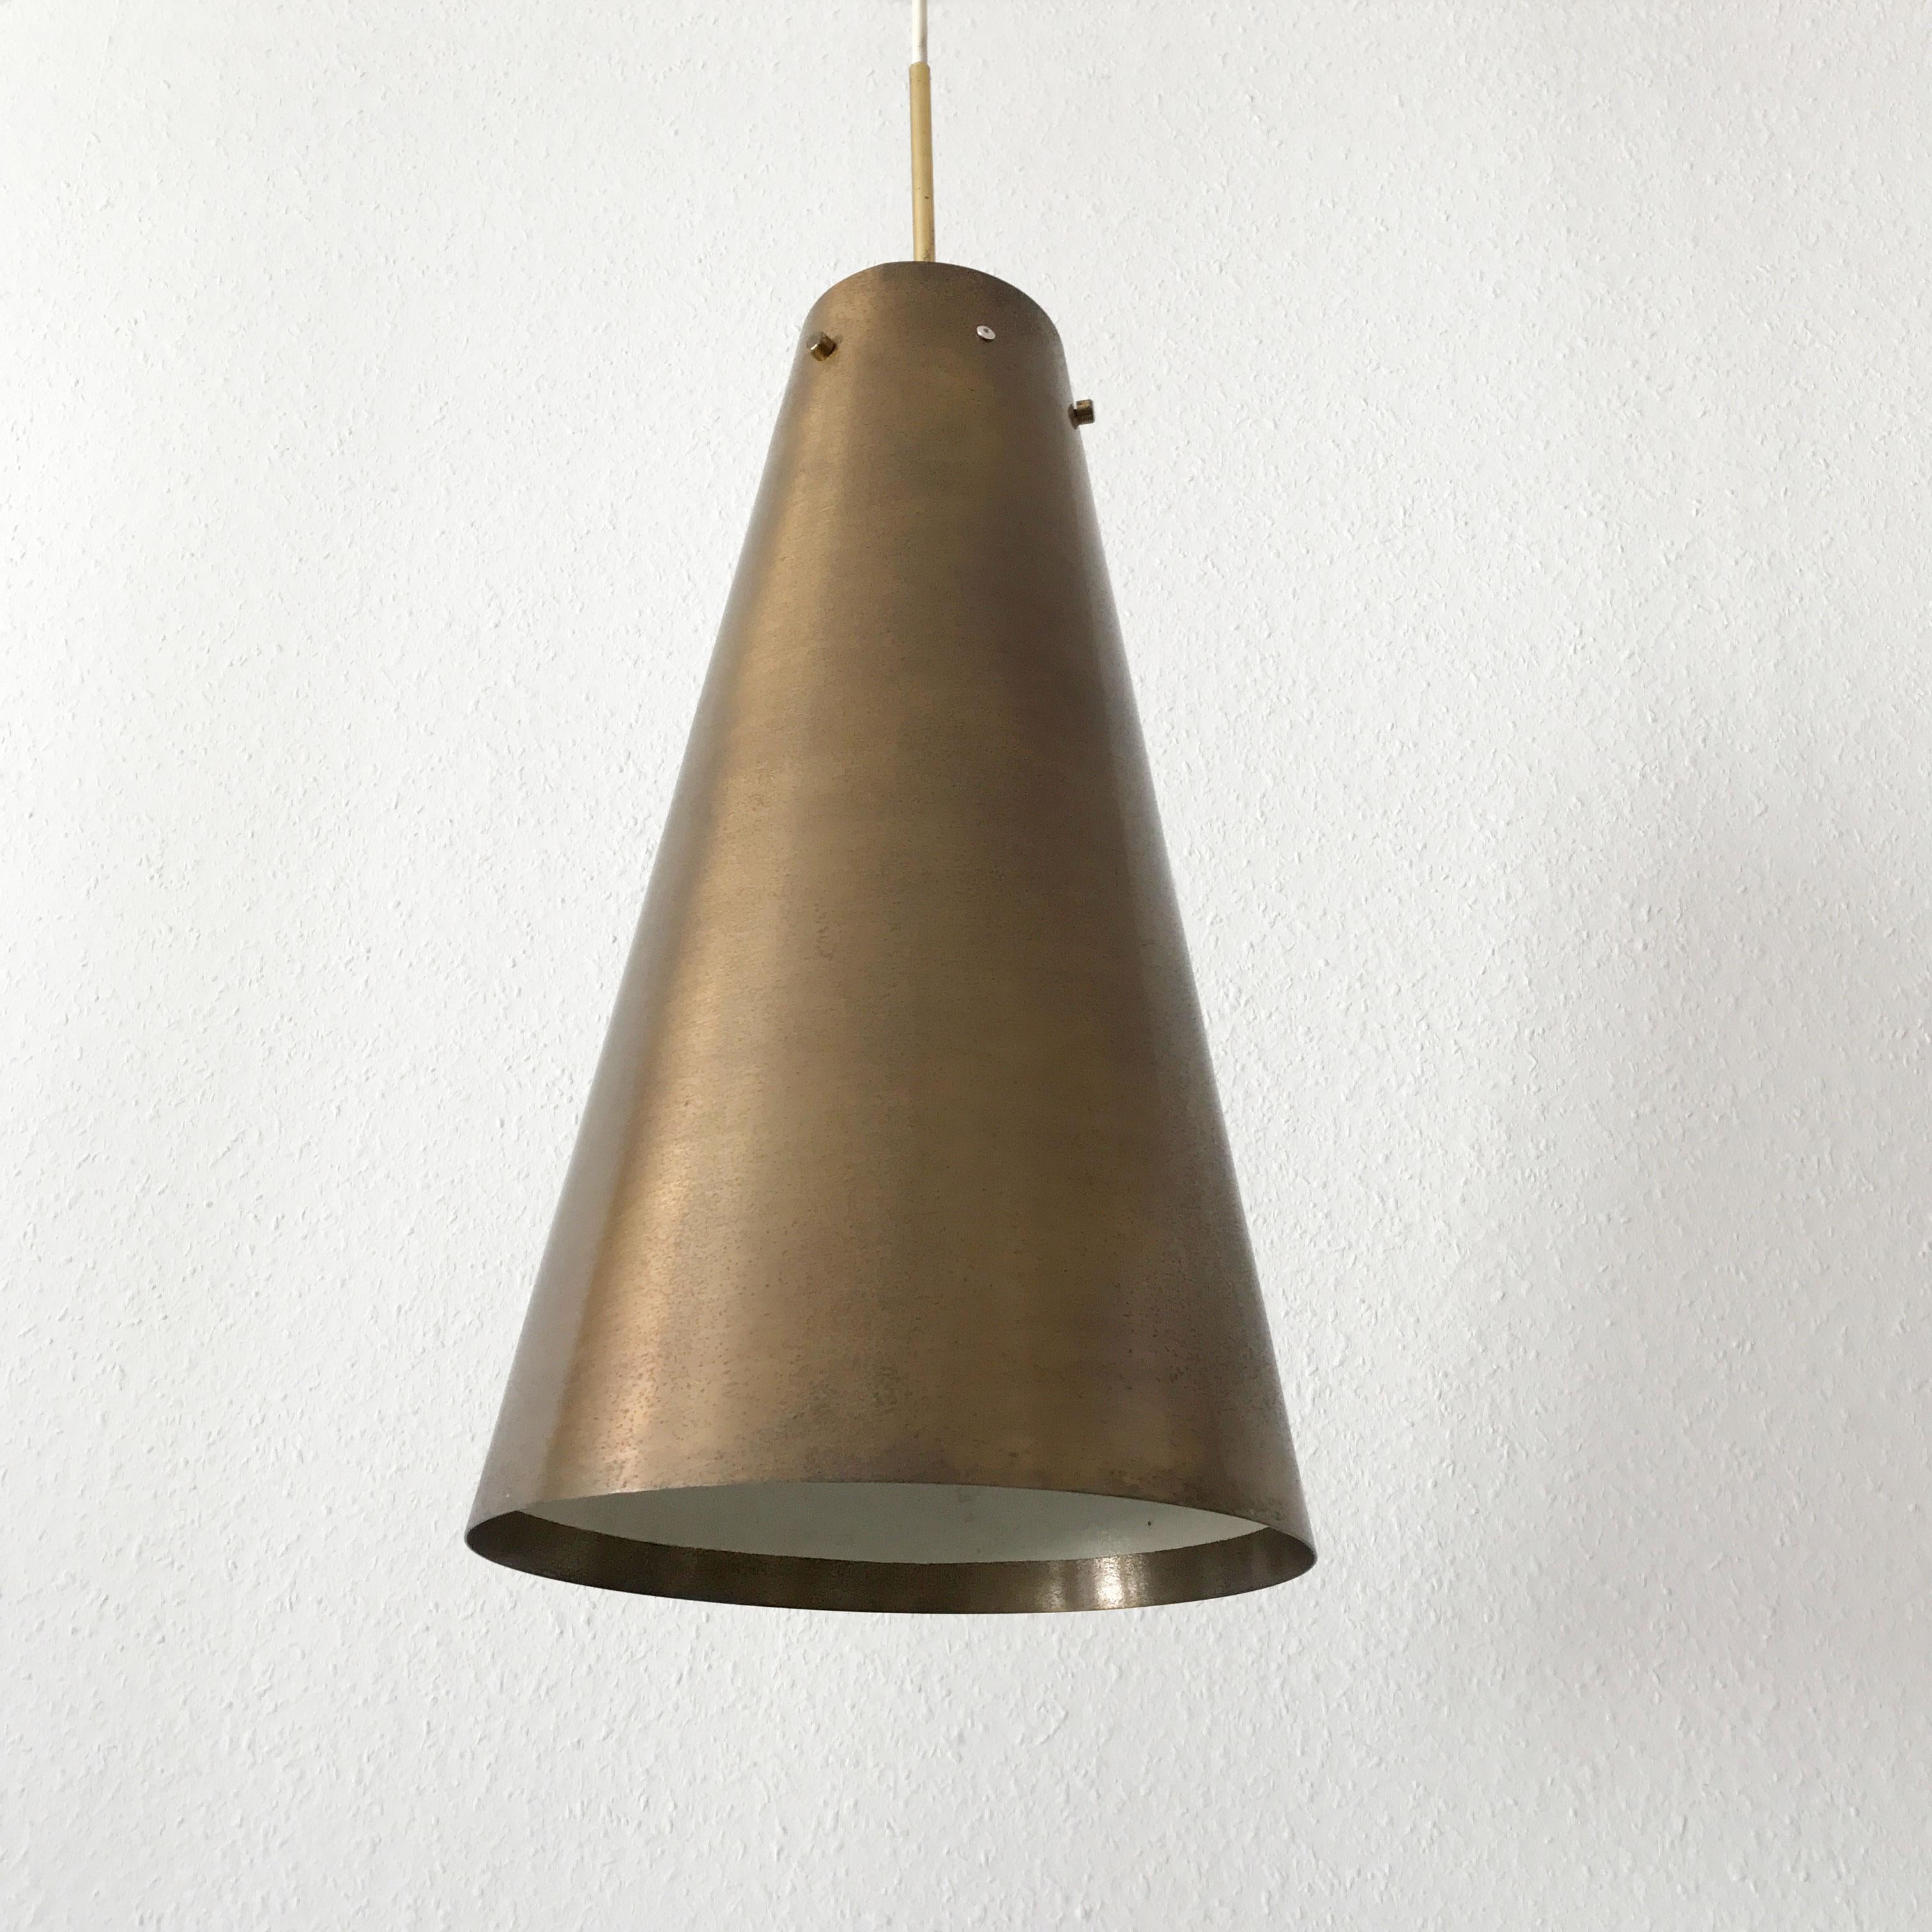 Mid-20th Century Rare and Large Mid-Century Modern Brass Pendant Lamp, 1950s, Germany